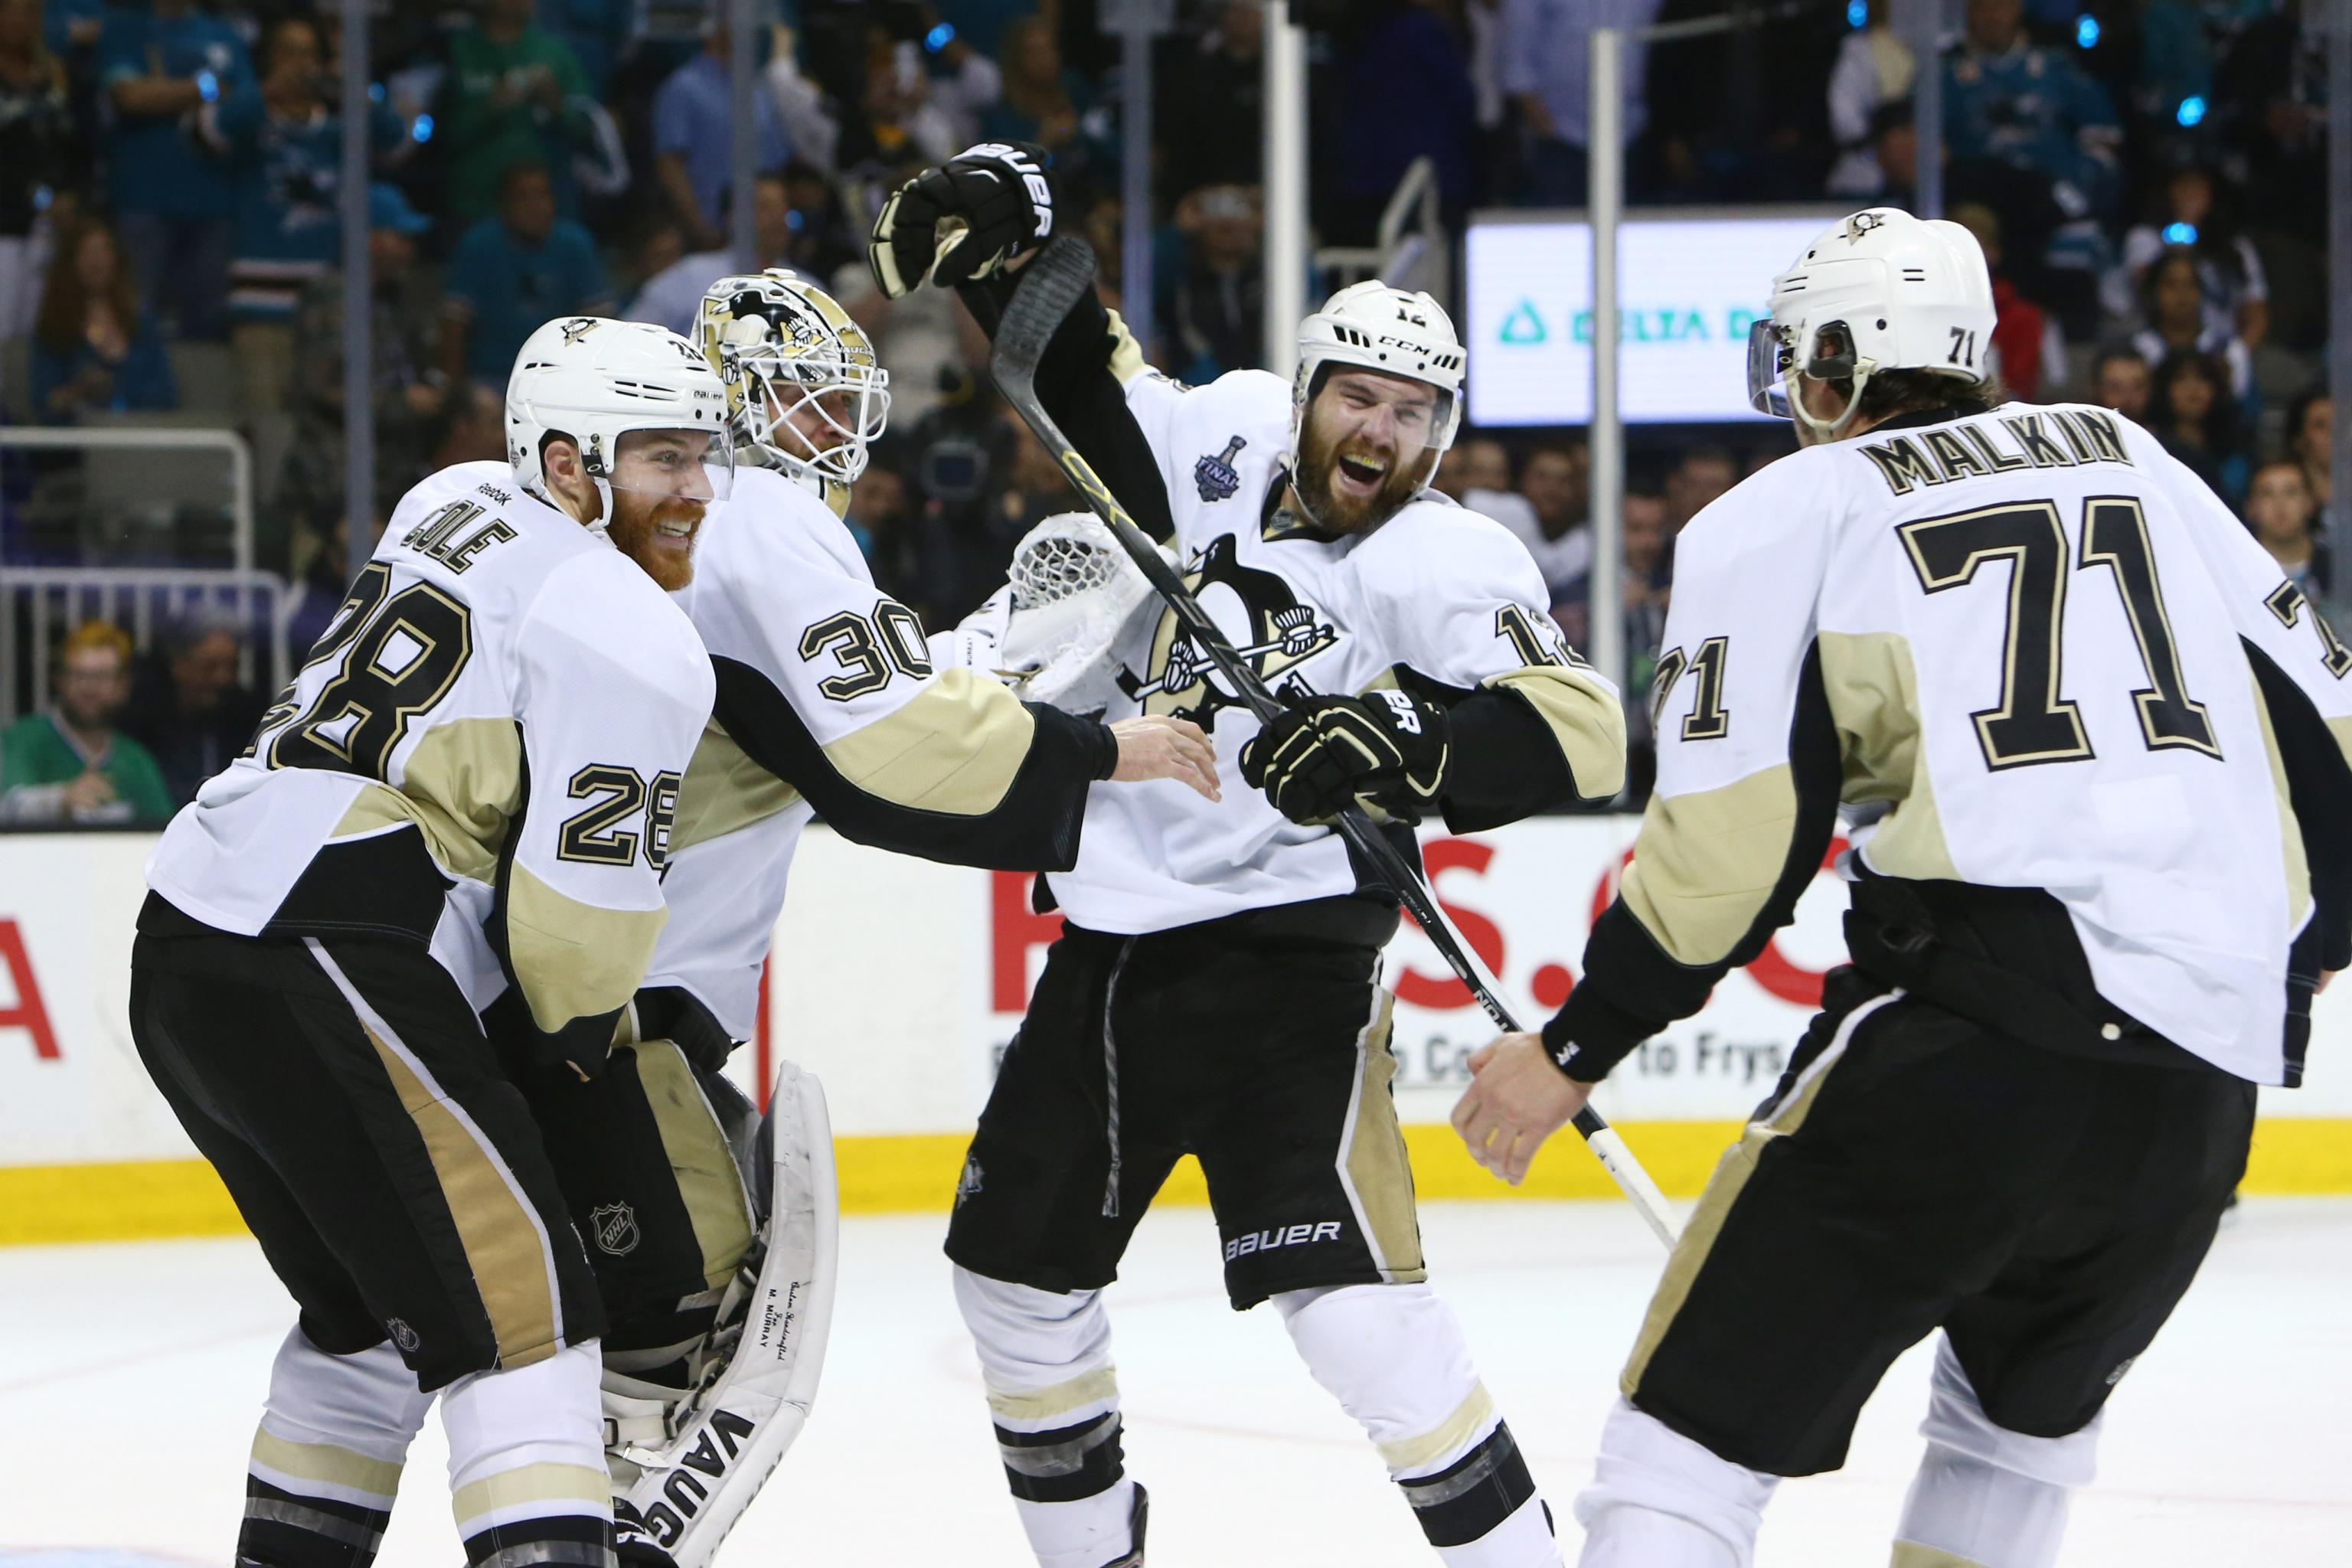 Penguins beat Lightning, will meet Sharks in Cup Final - Sports Illustrated